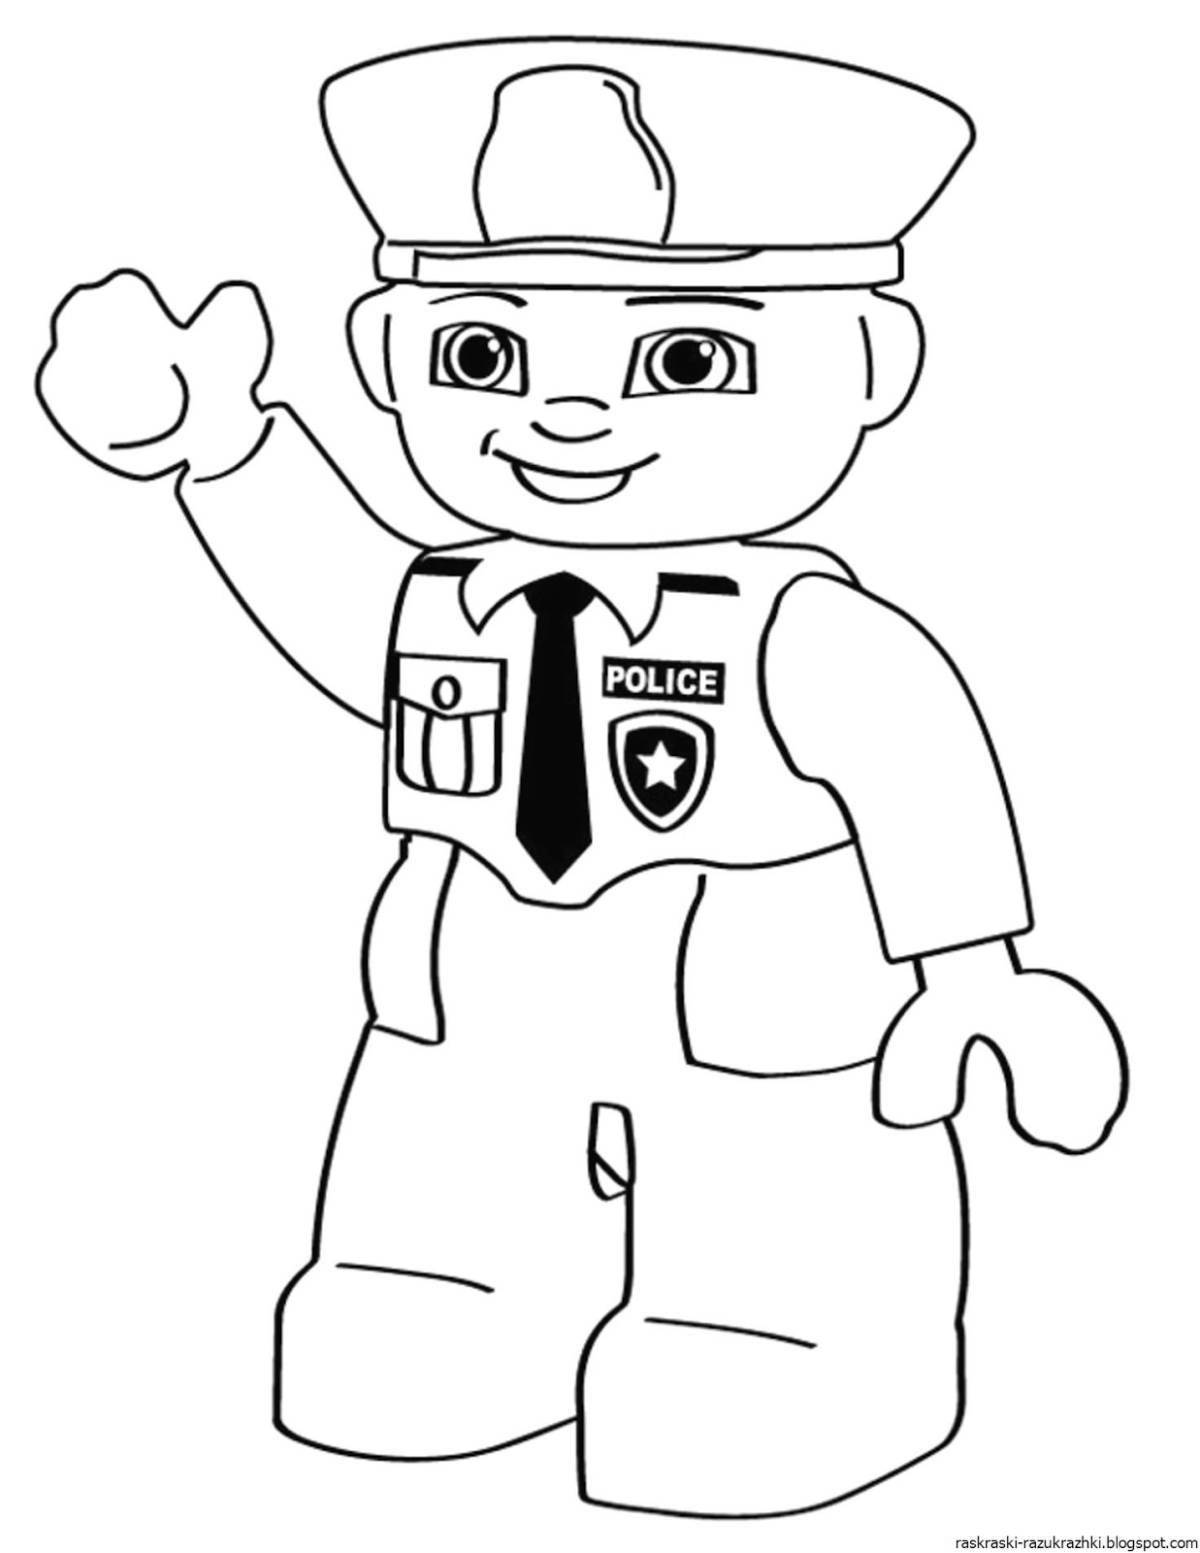 Funny cop coloring for kids